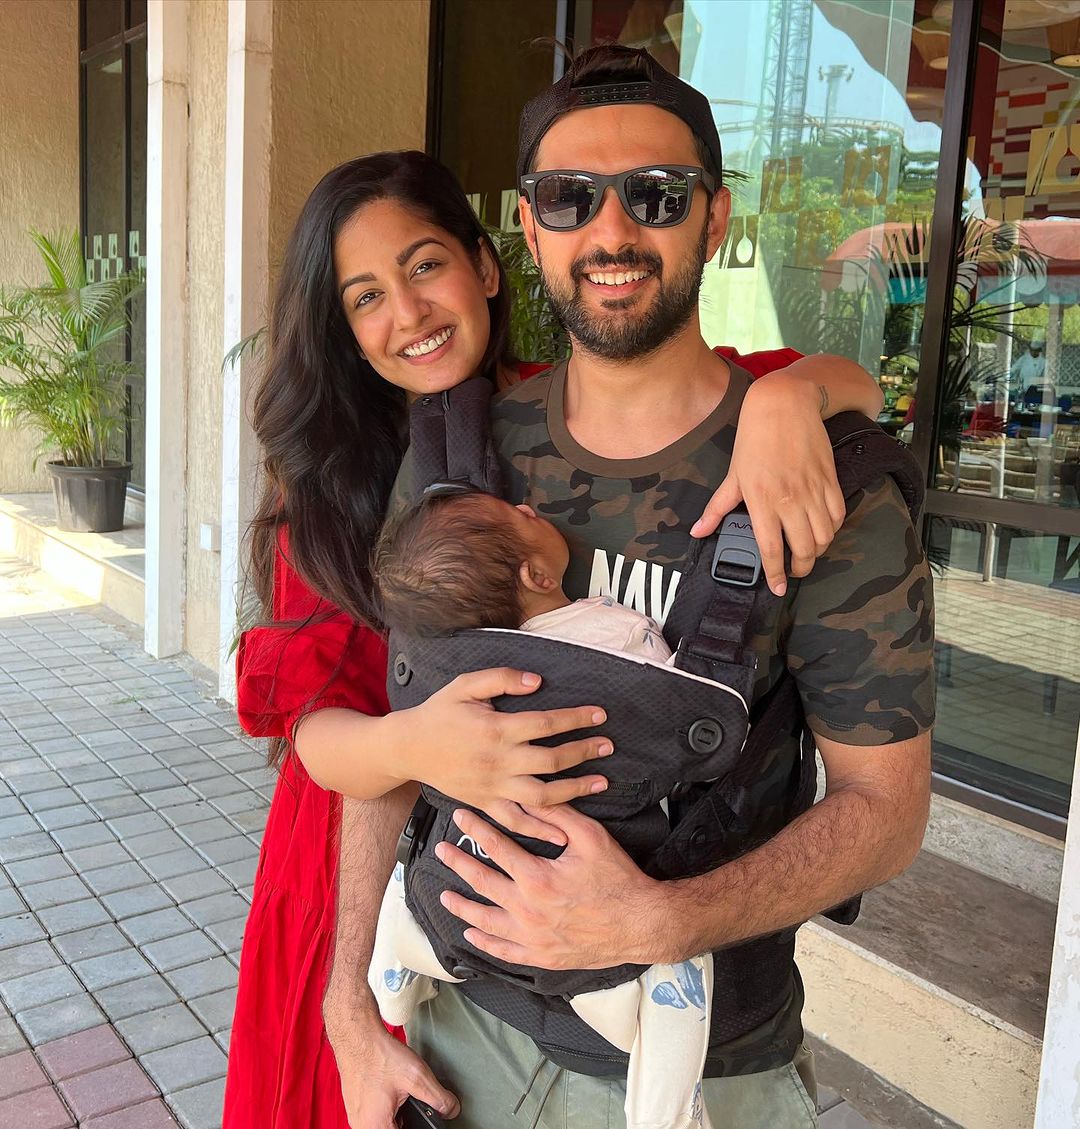 Adorable Couple Vatsal Sheth And Ishita Dutta Celebrate Republic Day With Their On This Year. Read What The Handsome Dad Shared!